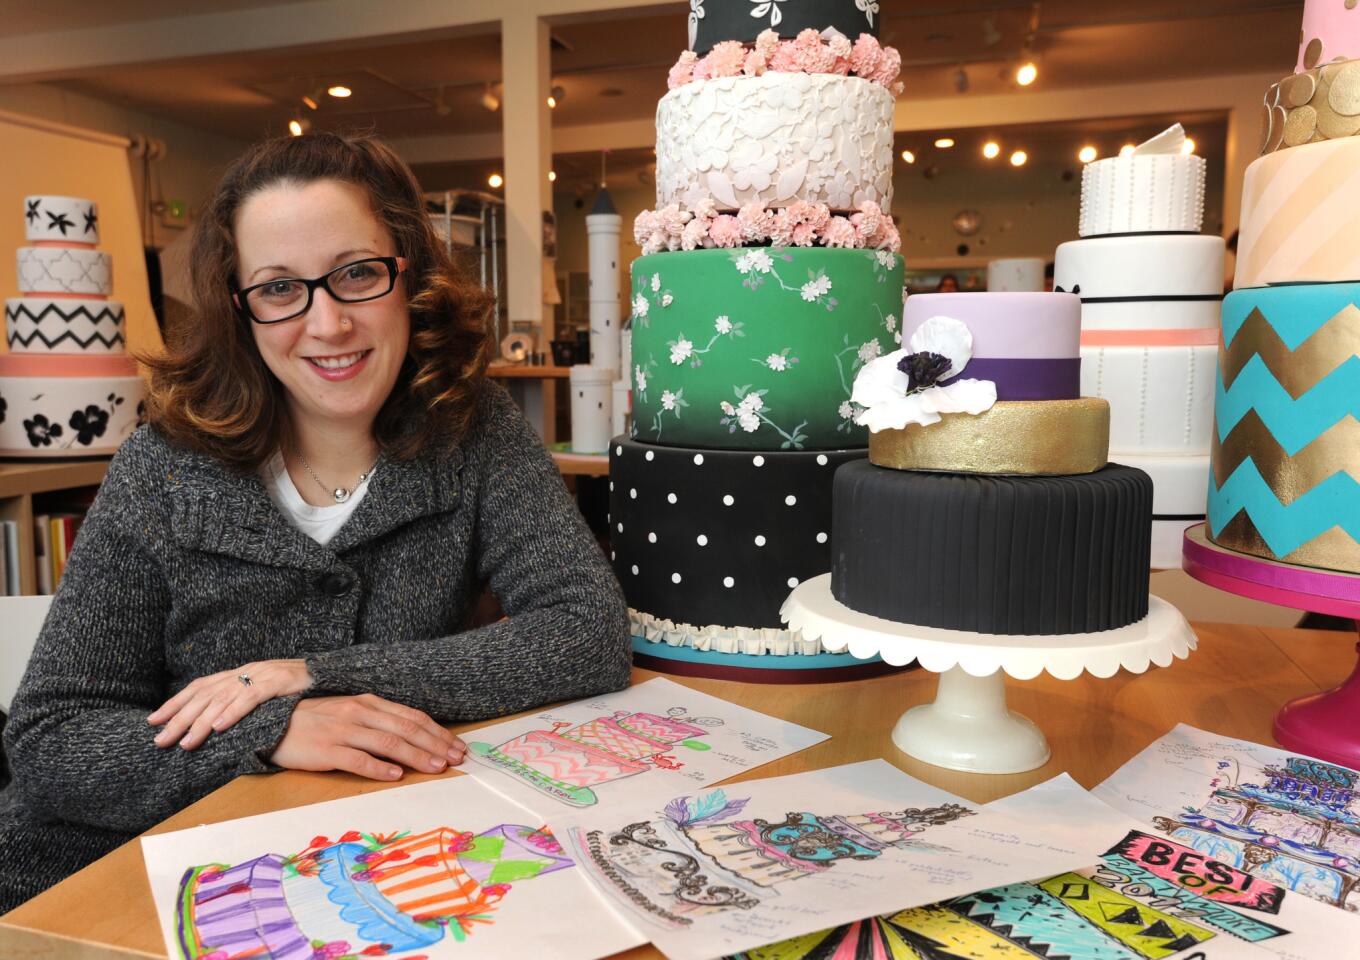 Mary Alice Yeskey, former director of marketing for Charm City Cakes, received a master of arts degree at UB in 2005.